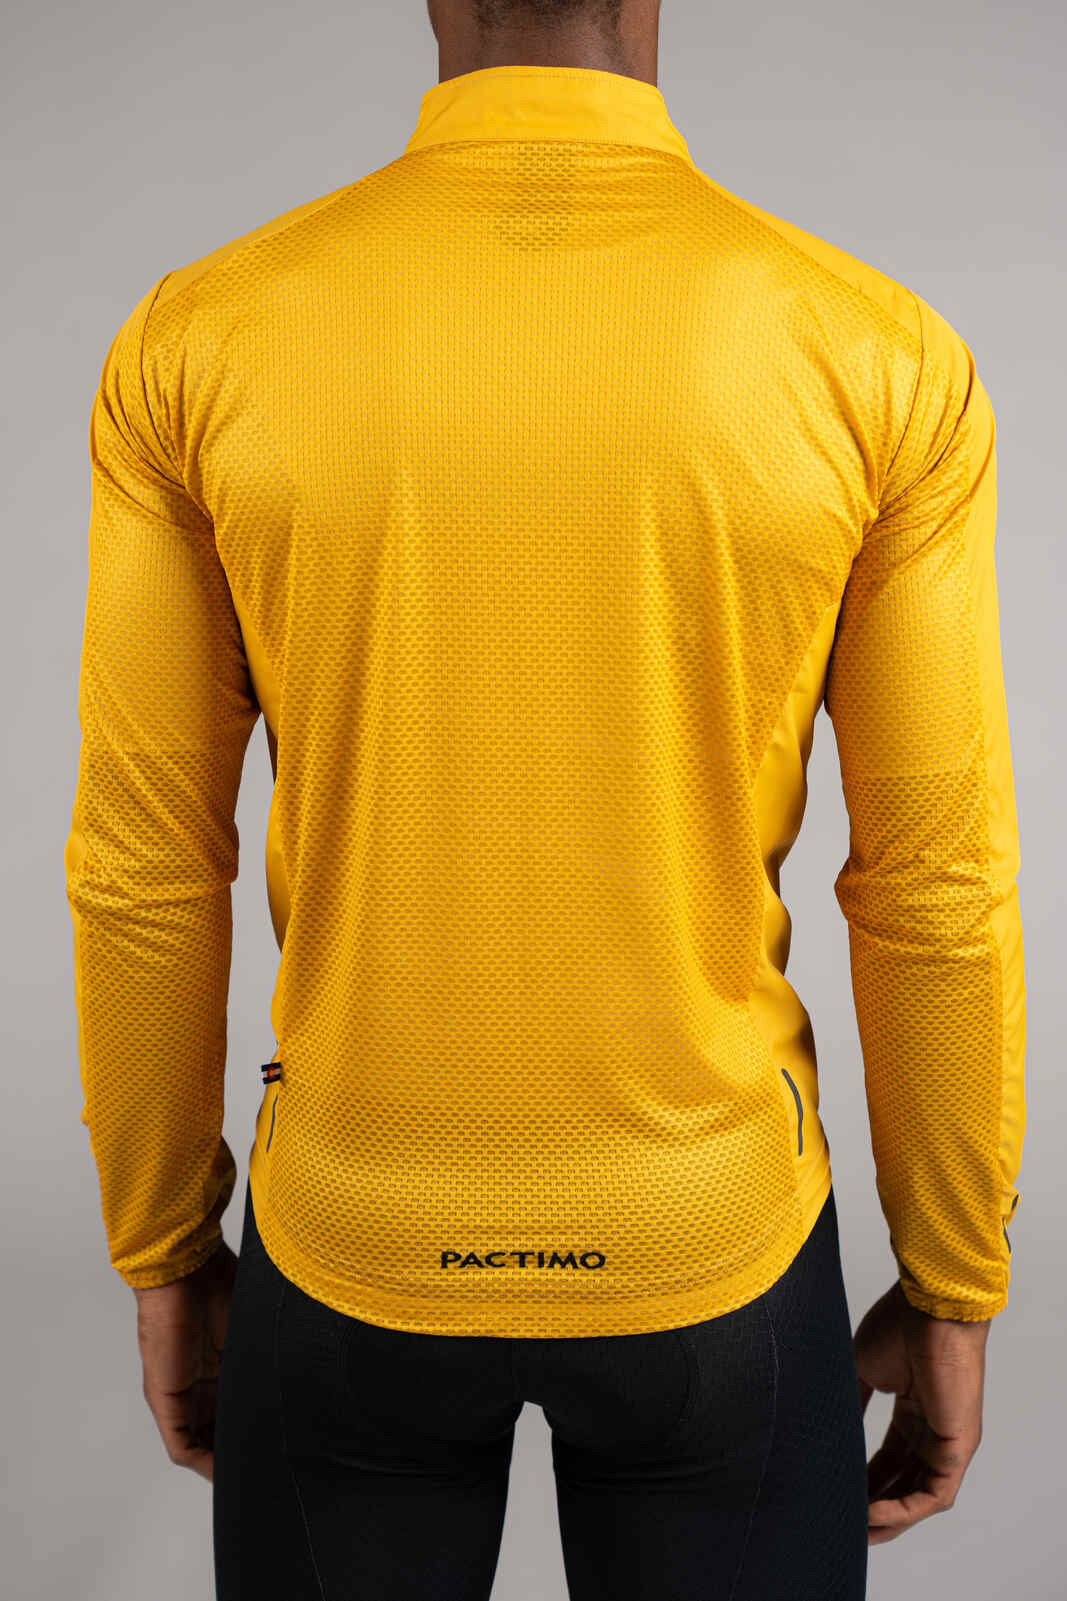 Men's Packable Golden Yellow Cycling Wind Jacket - Back Mesh Fabric Close-Up